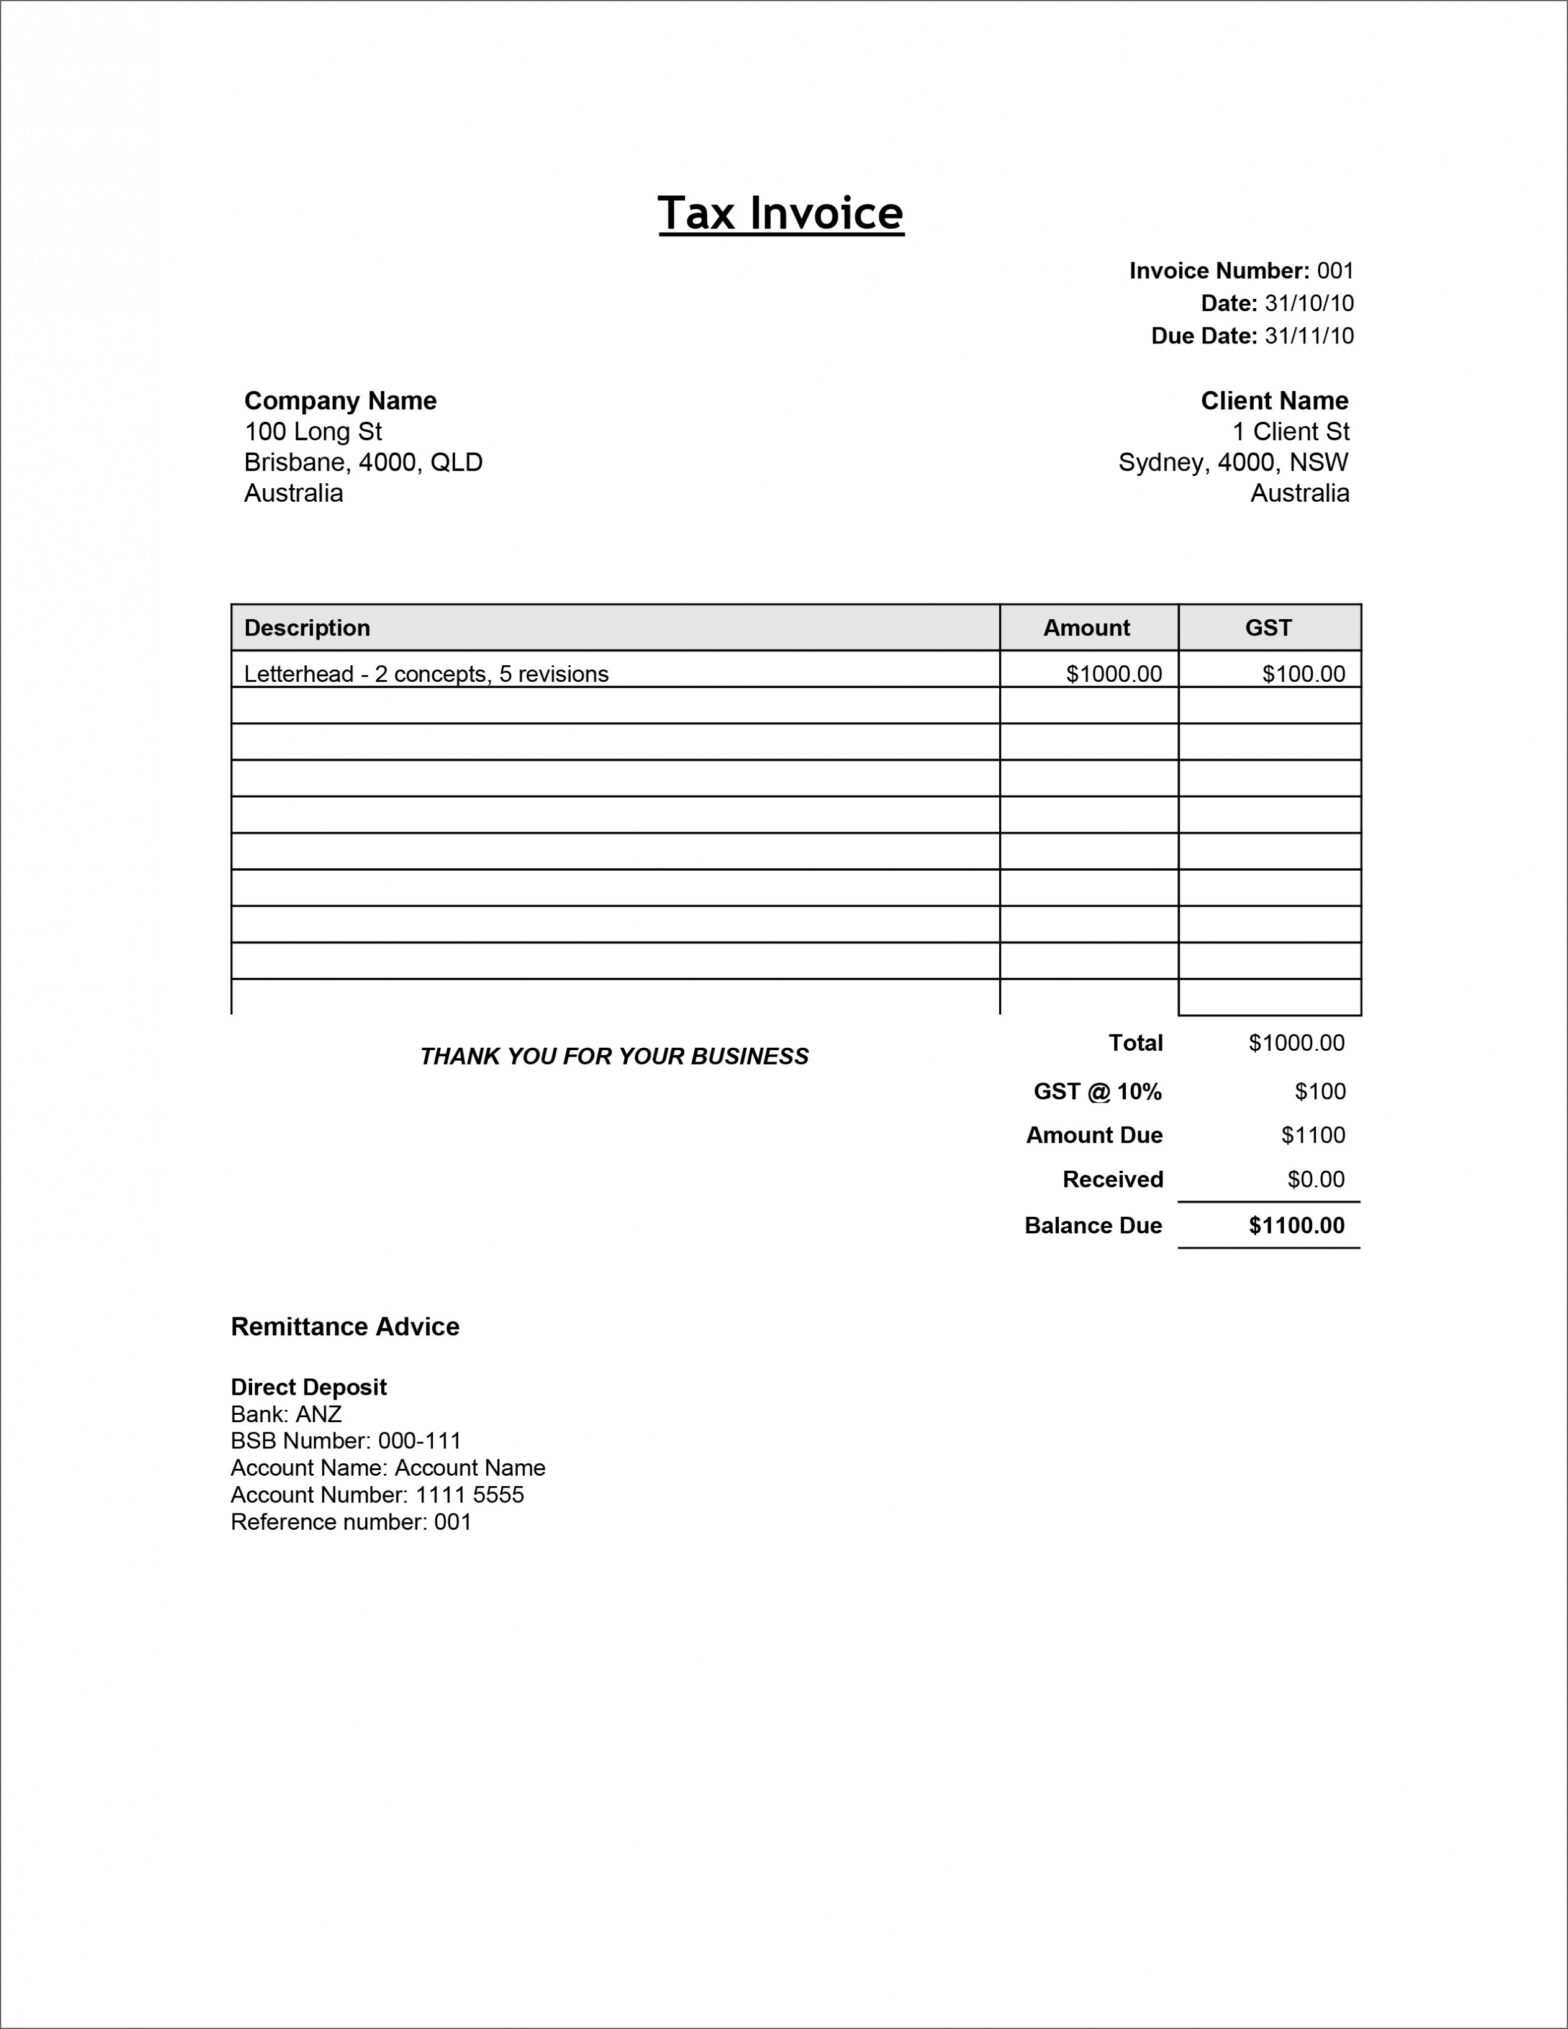 tax-invoice-template-word-doc-australia-great-professional-template